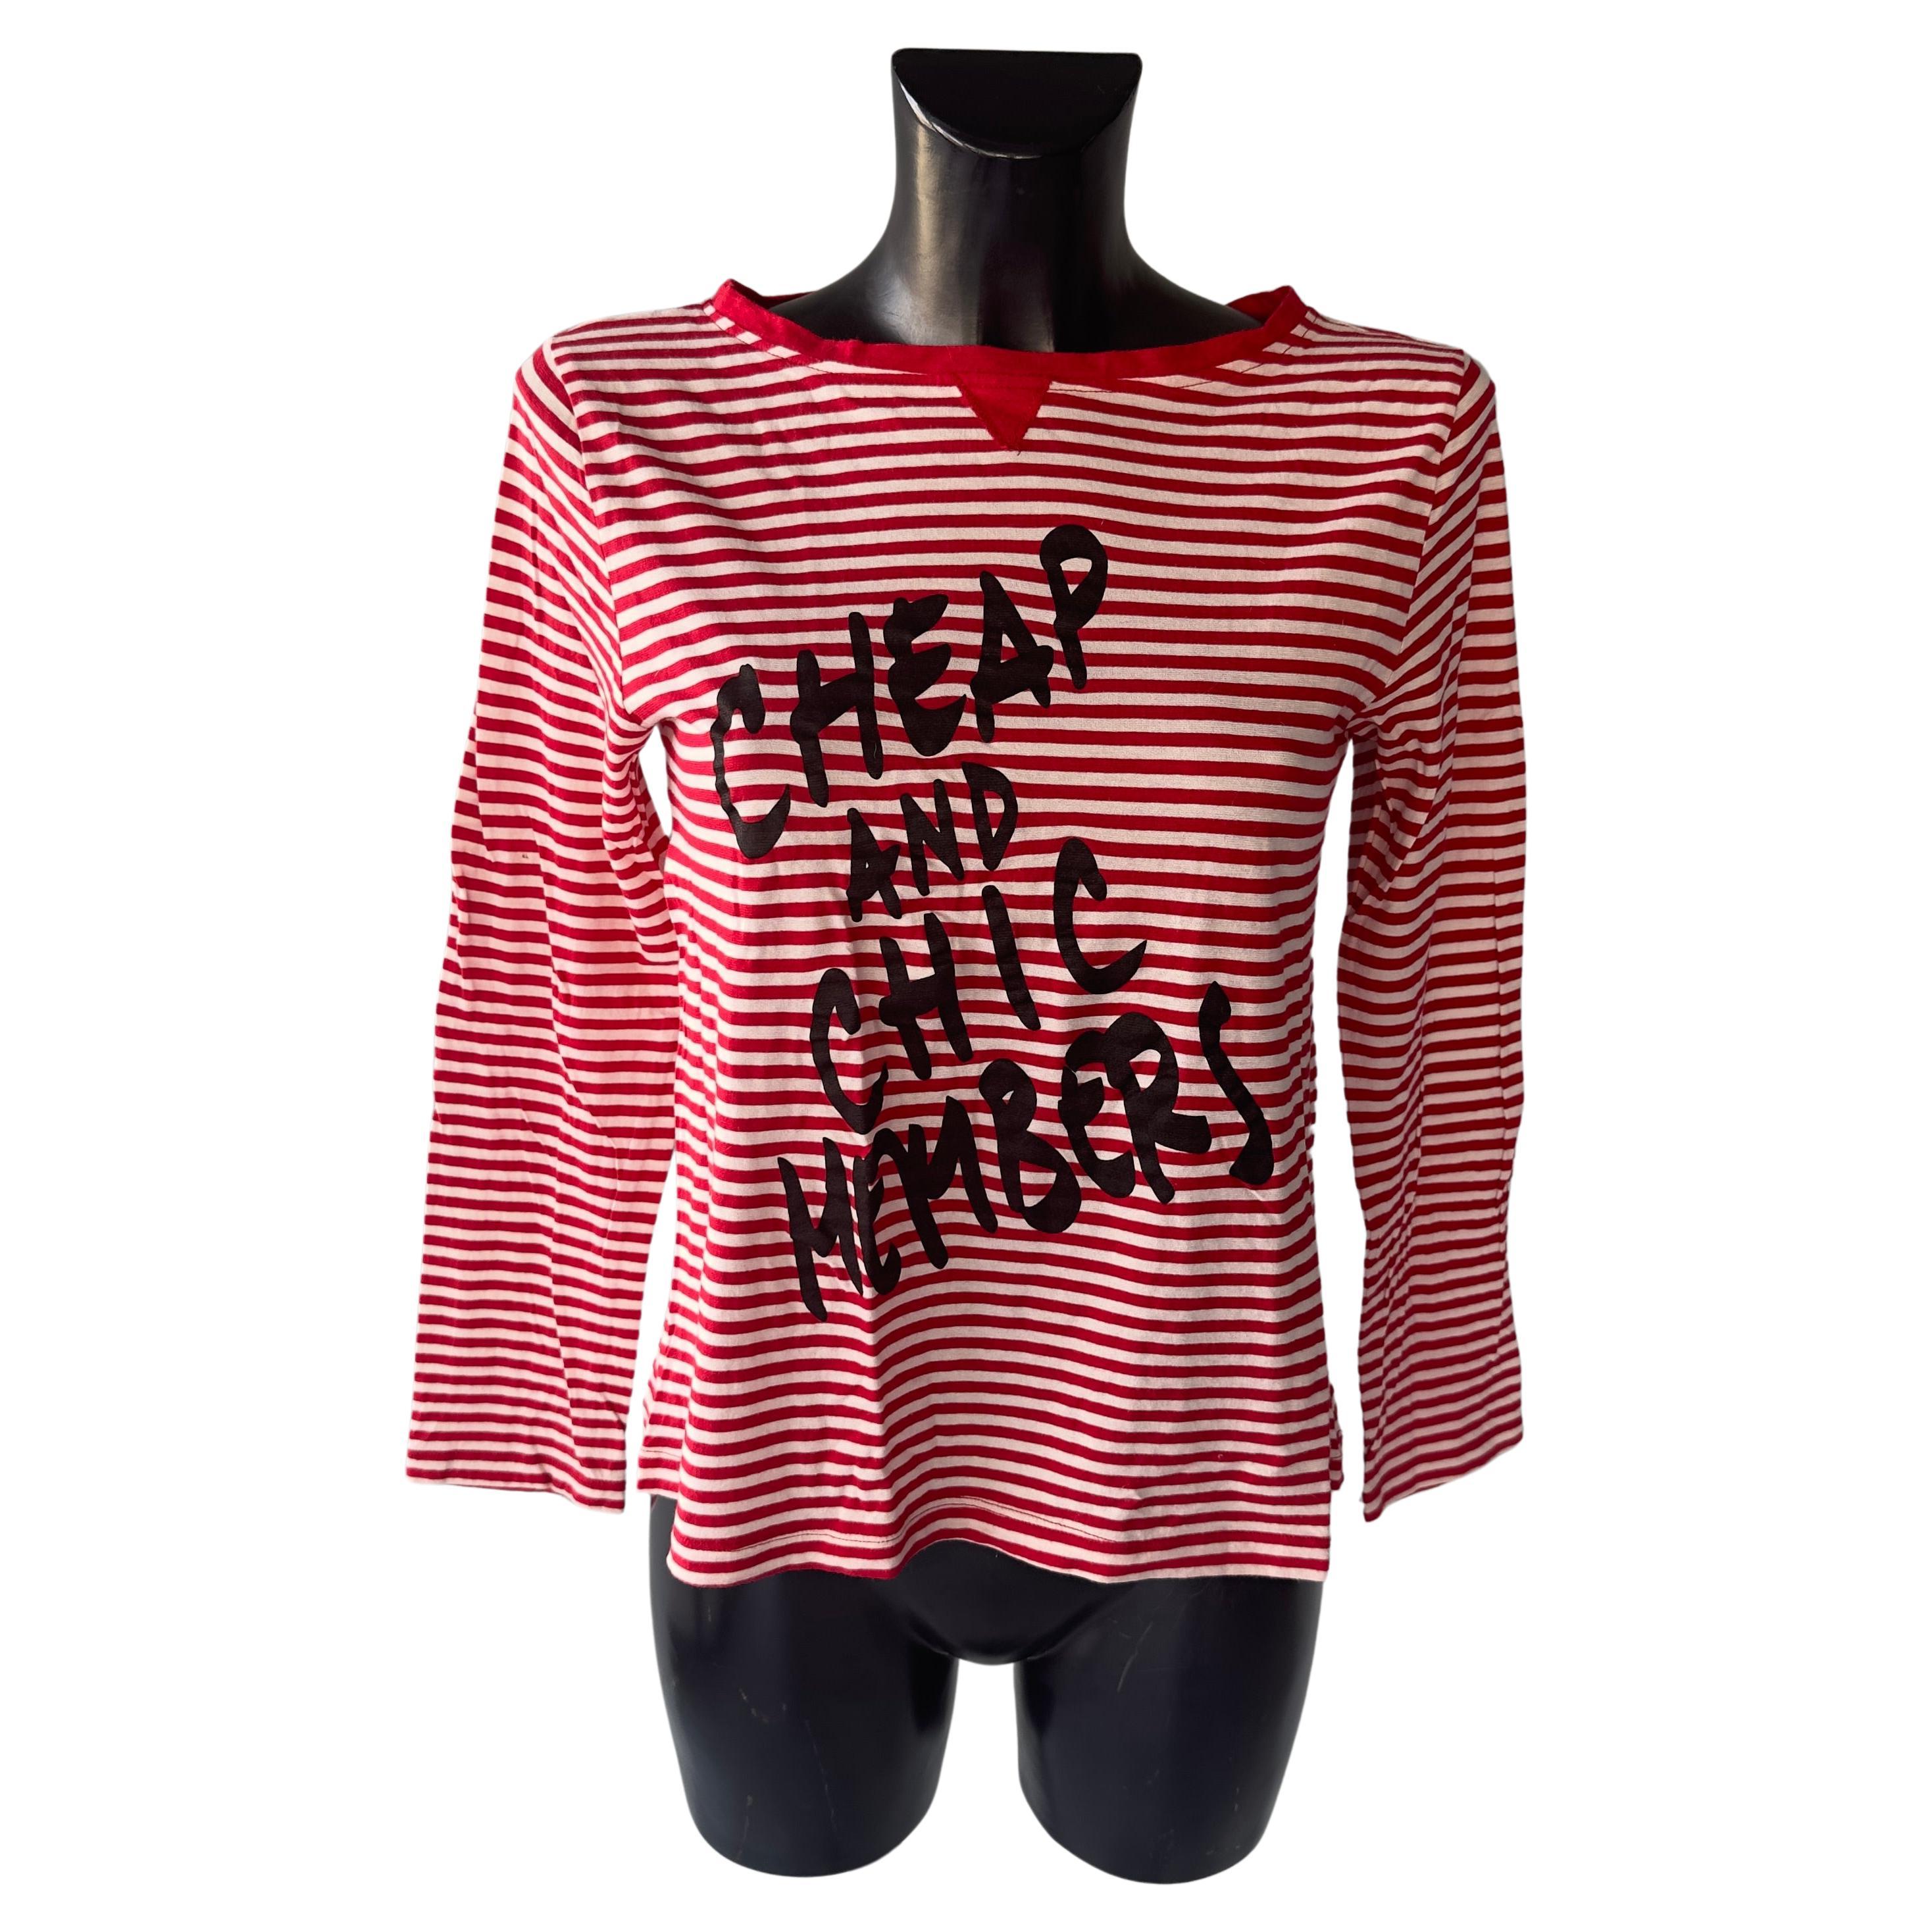 Moschino Cheap and Chic T-shirt For Sale